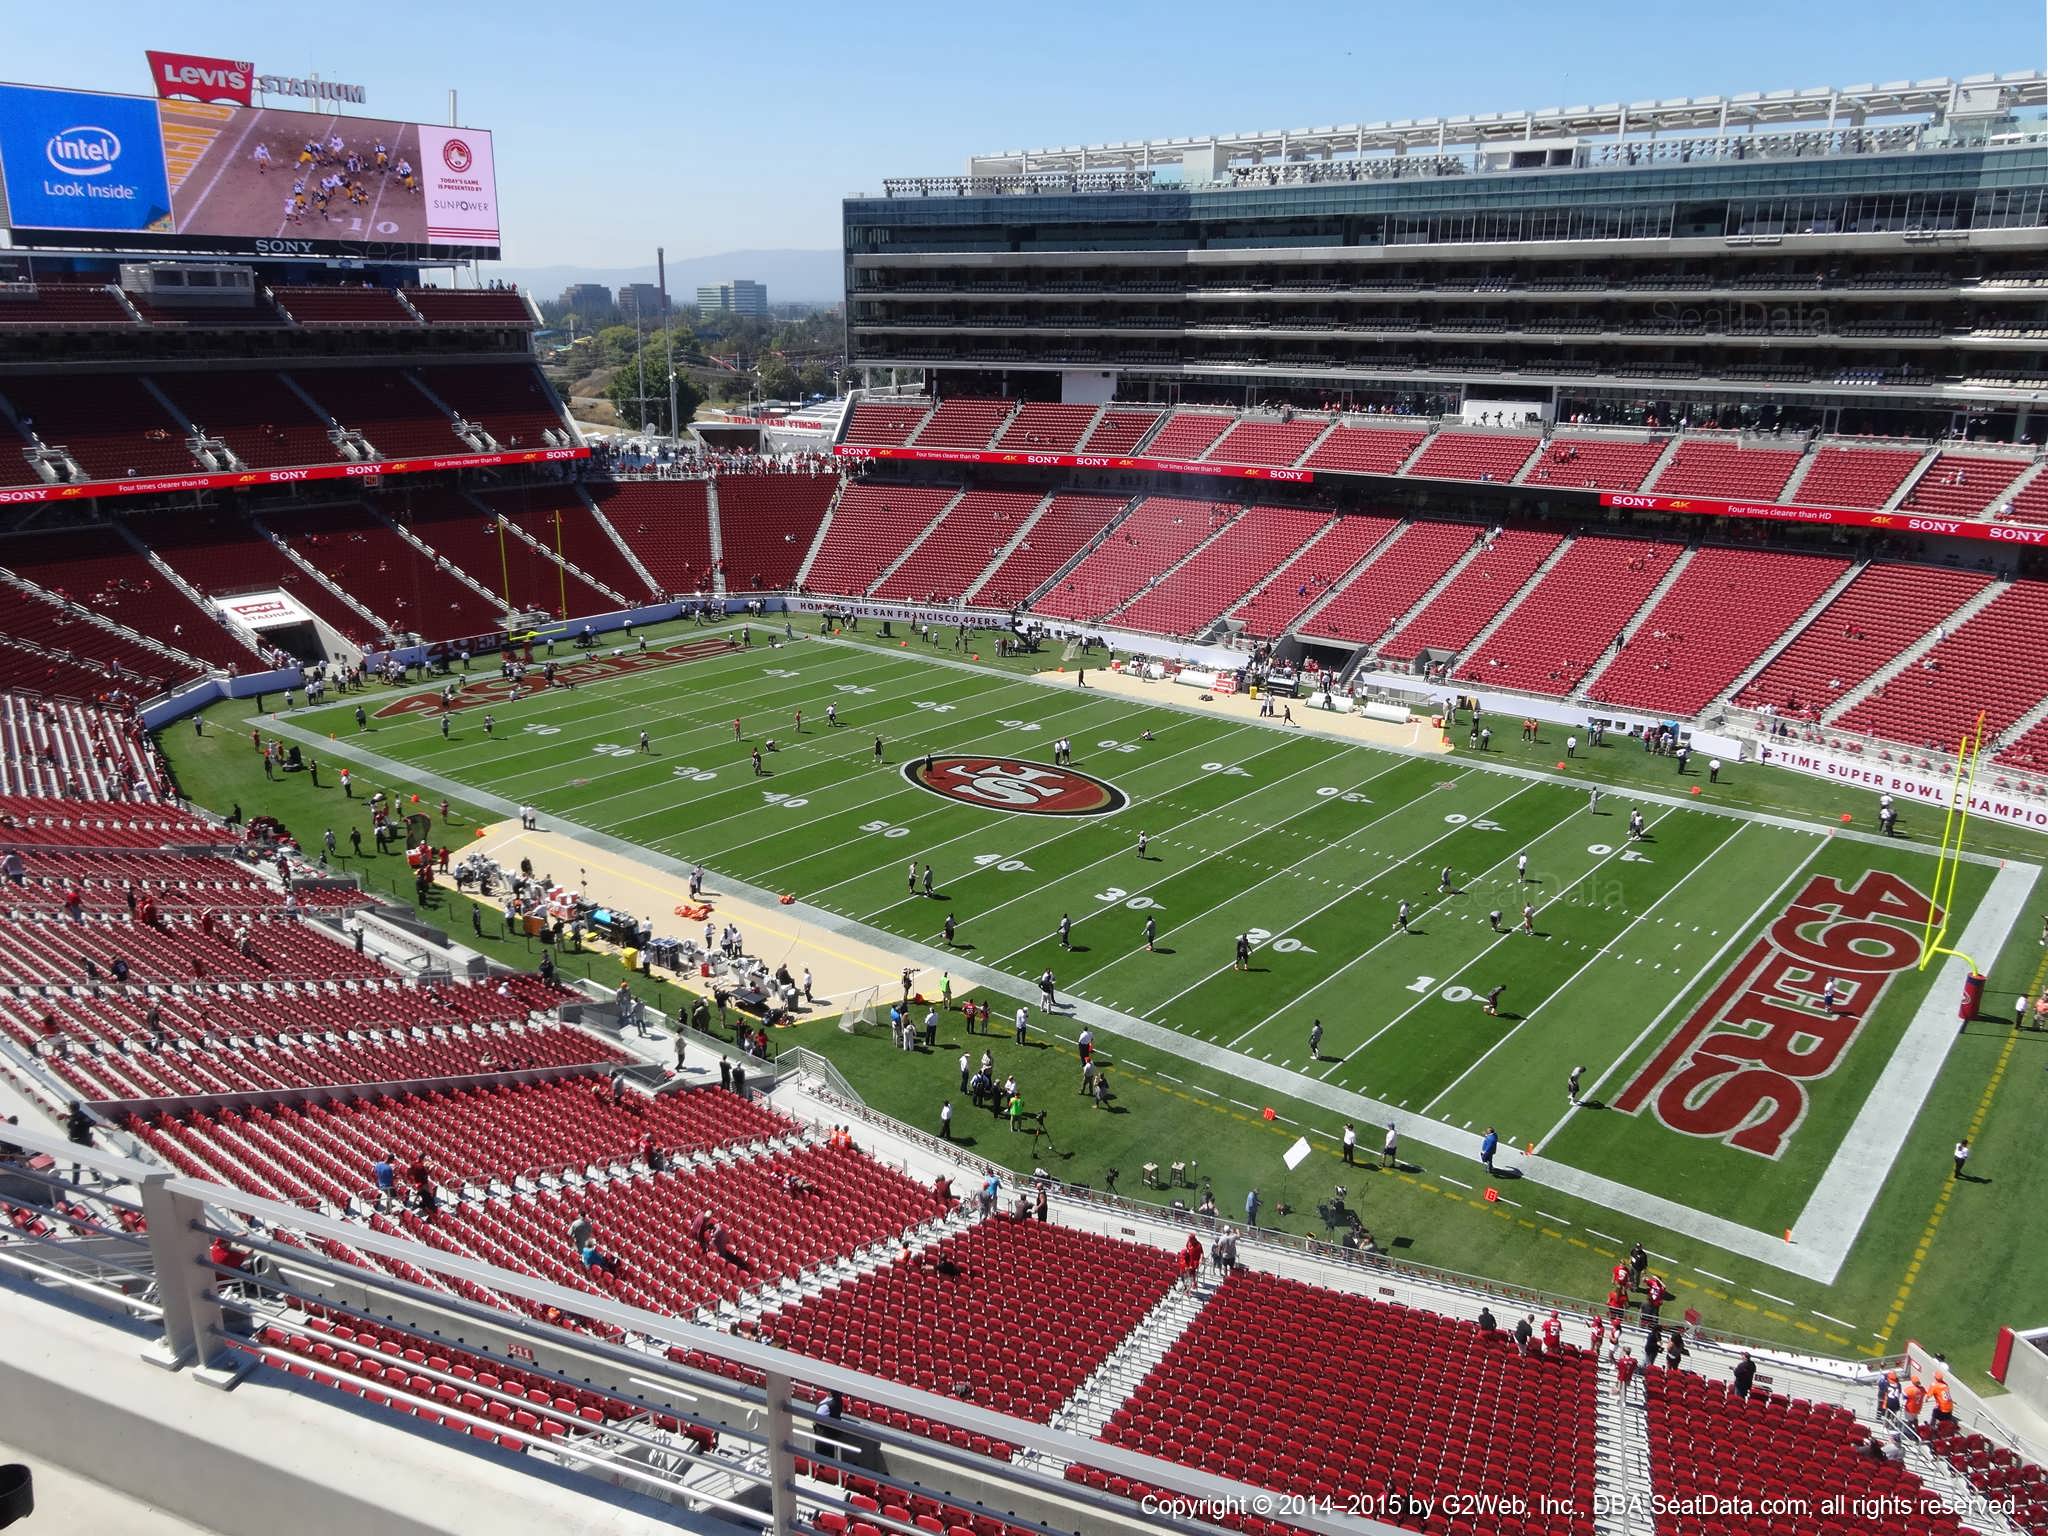 Seat view from section 310 at Levi’s Stadium, home of the San Francisco 49ers